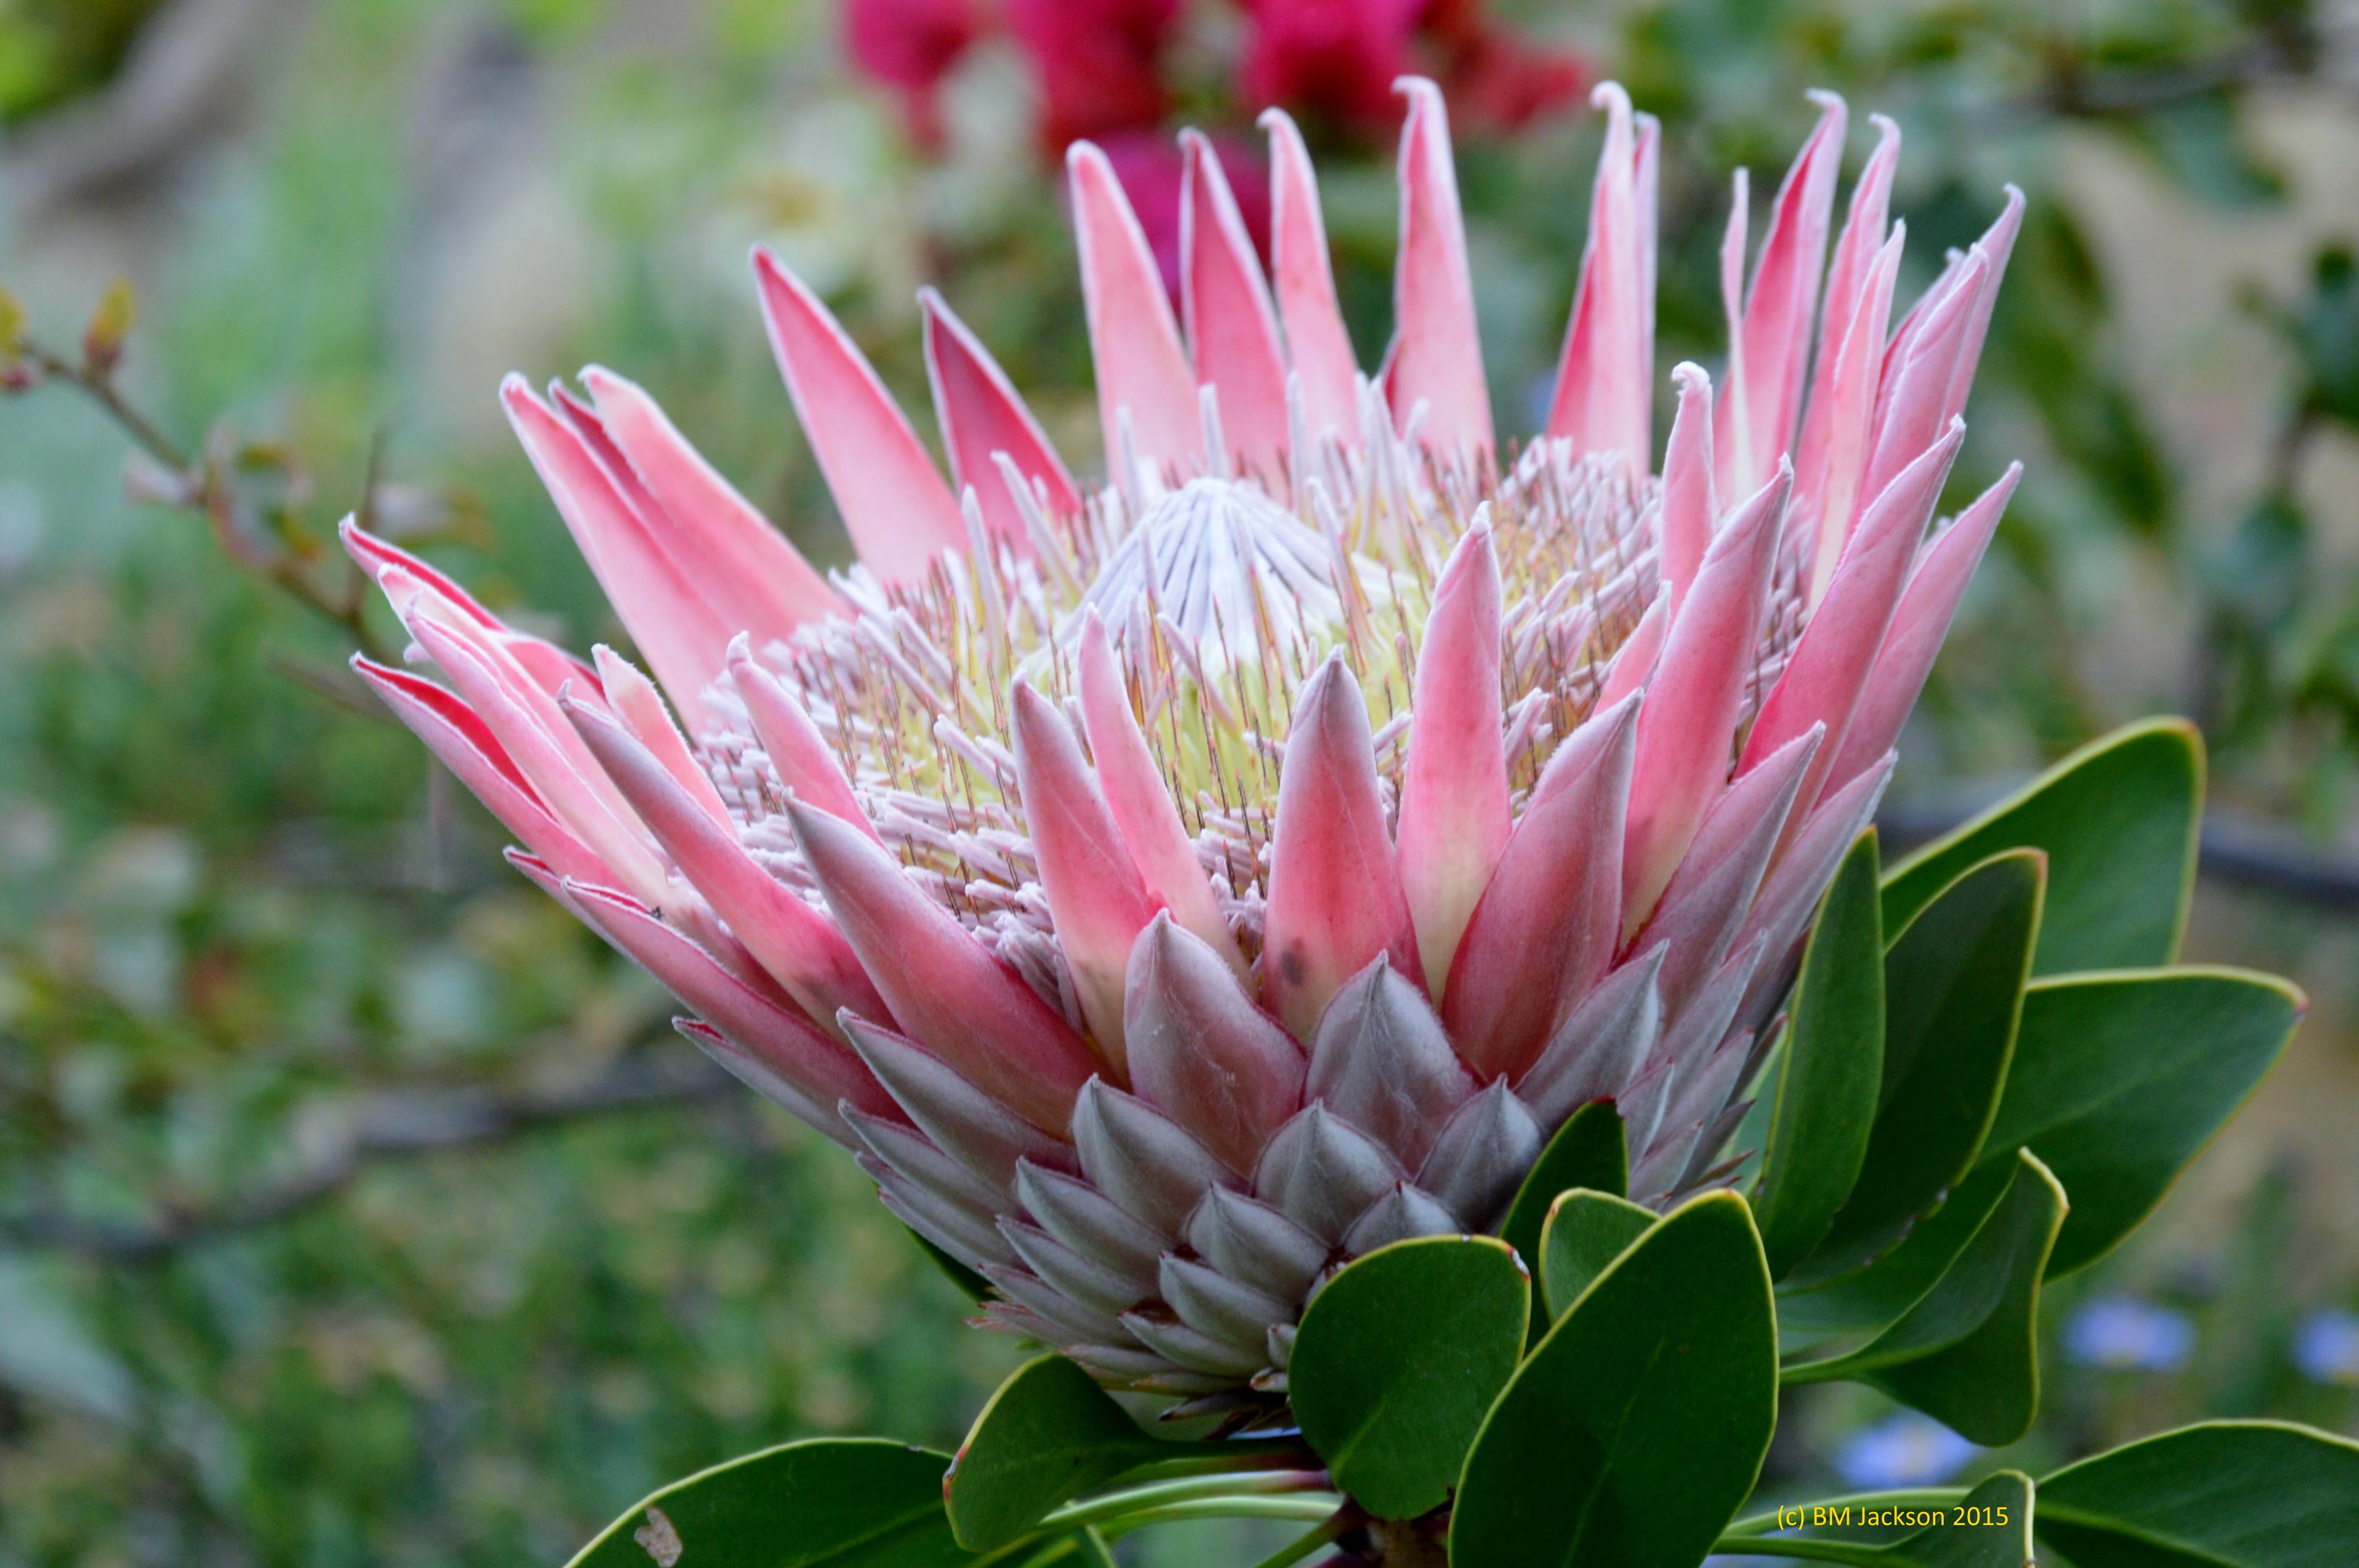 The King of Proteas – South African National Flower | BMJNature